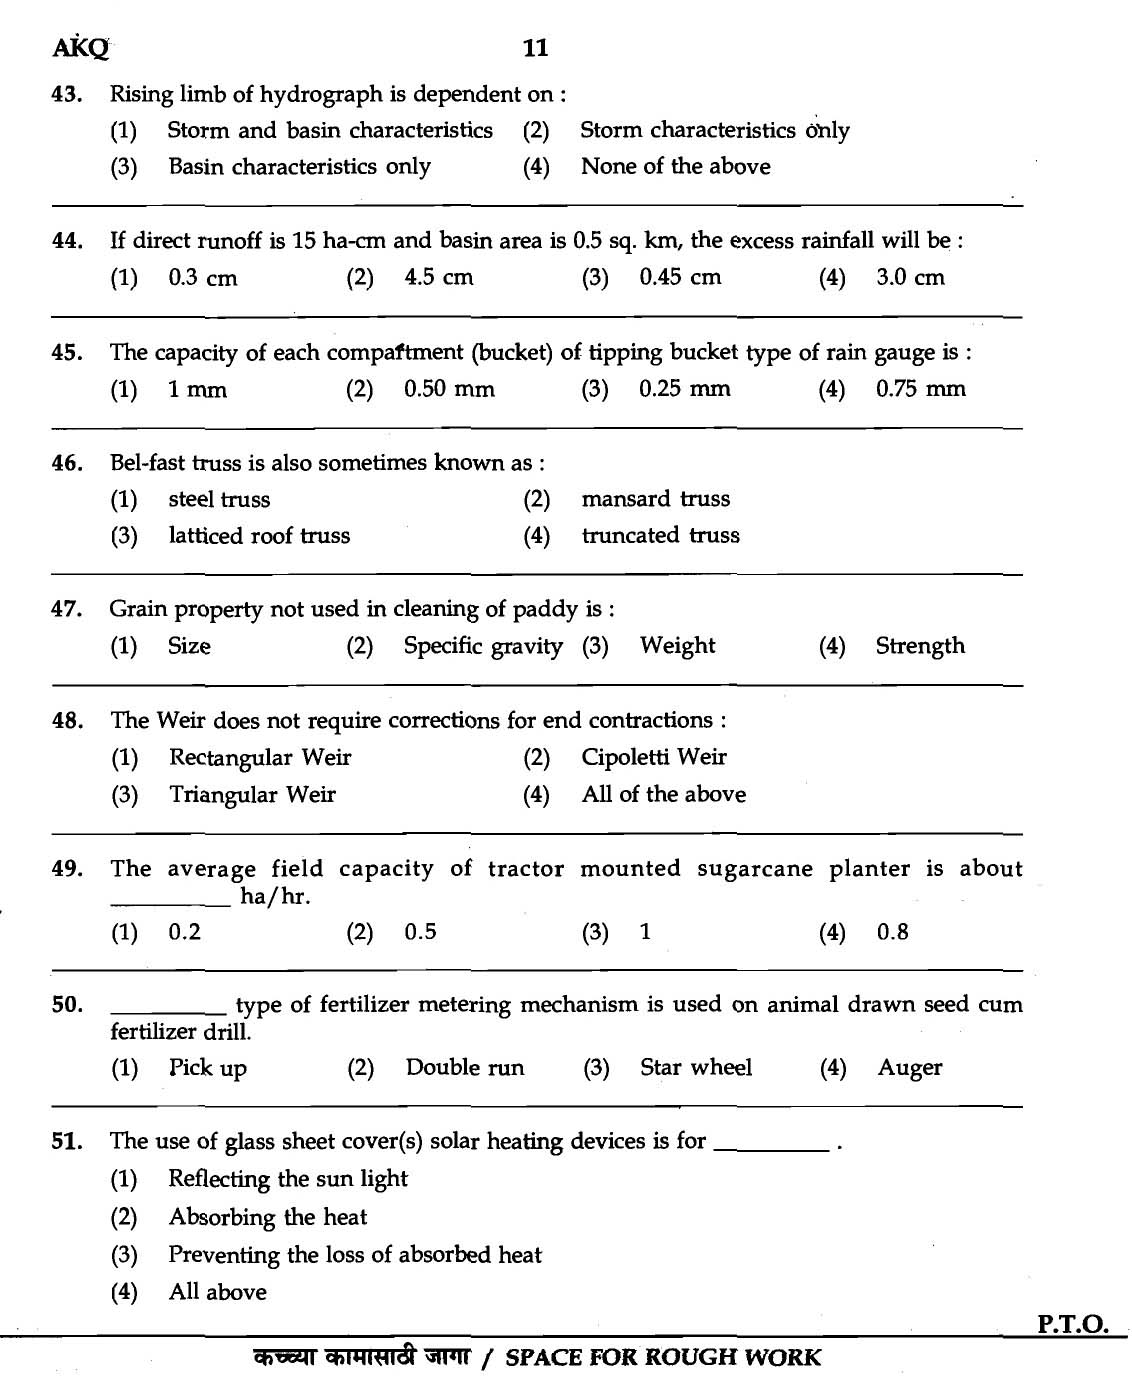 MPSC Agricultural Services Exam 2007 Question Paper Agricultural Engineering 9